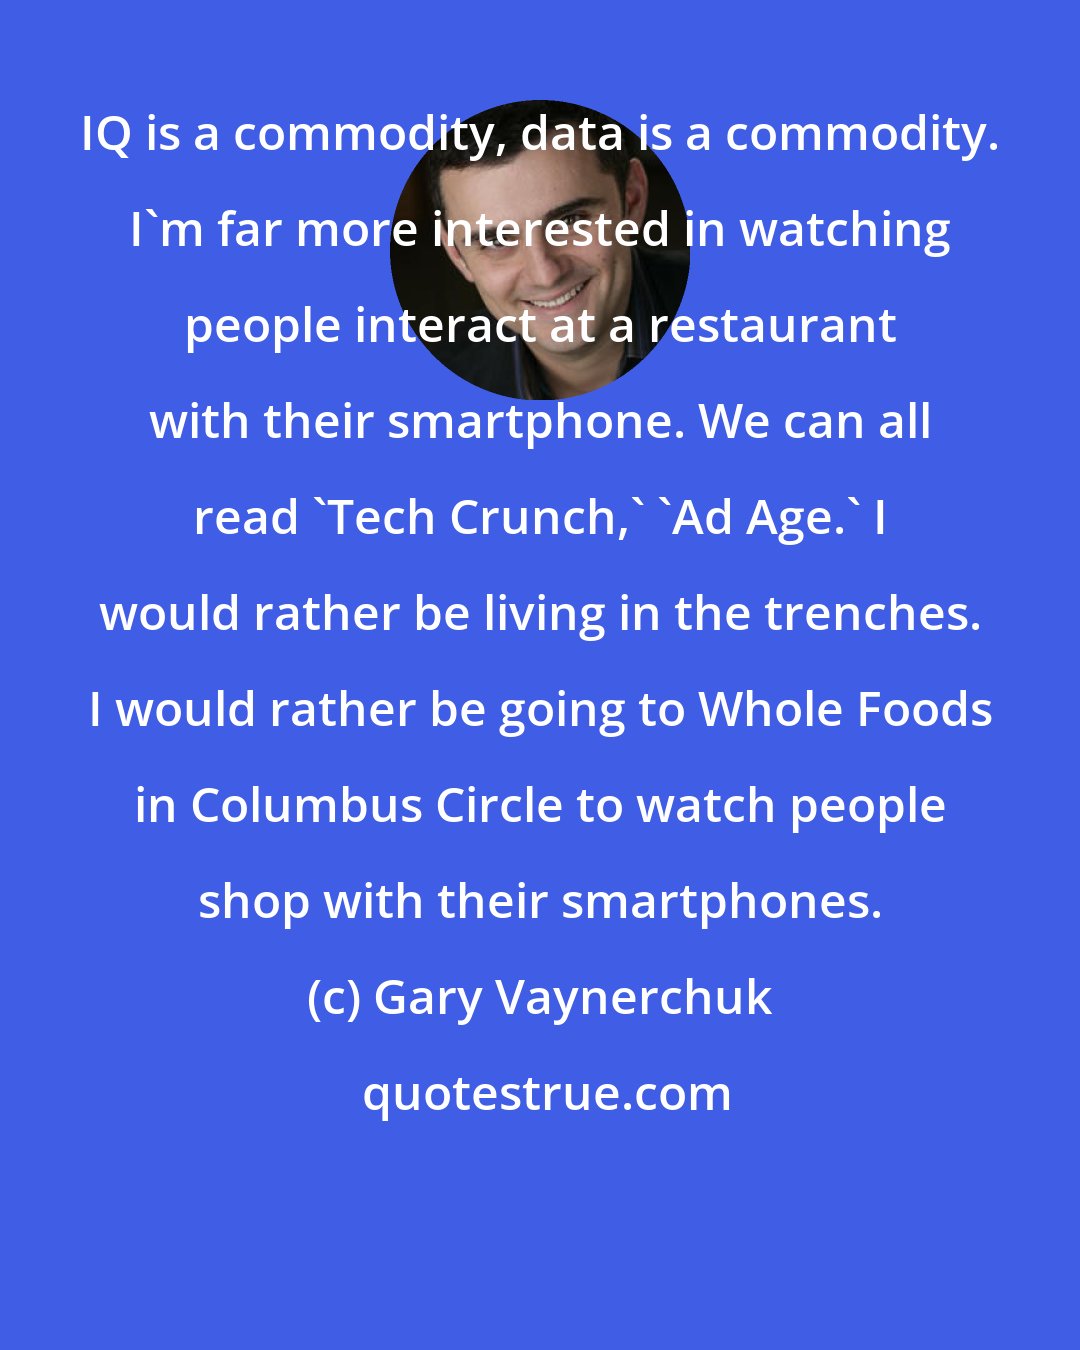 Gary Vaynerchuk: IQ is a commodity, data is a commodity. I'm far more interested in watching people interact at a restaurant with their smartphone. We can all read 'Tech Crunch,' 'Ad Age.' I would rather be living in the trenches. I would rather be going to Whole Foods in Columbus Circle to watch people shop with their smartphones.